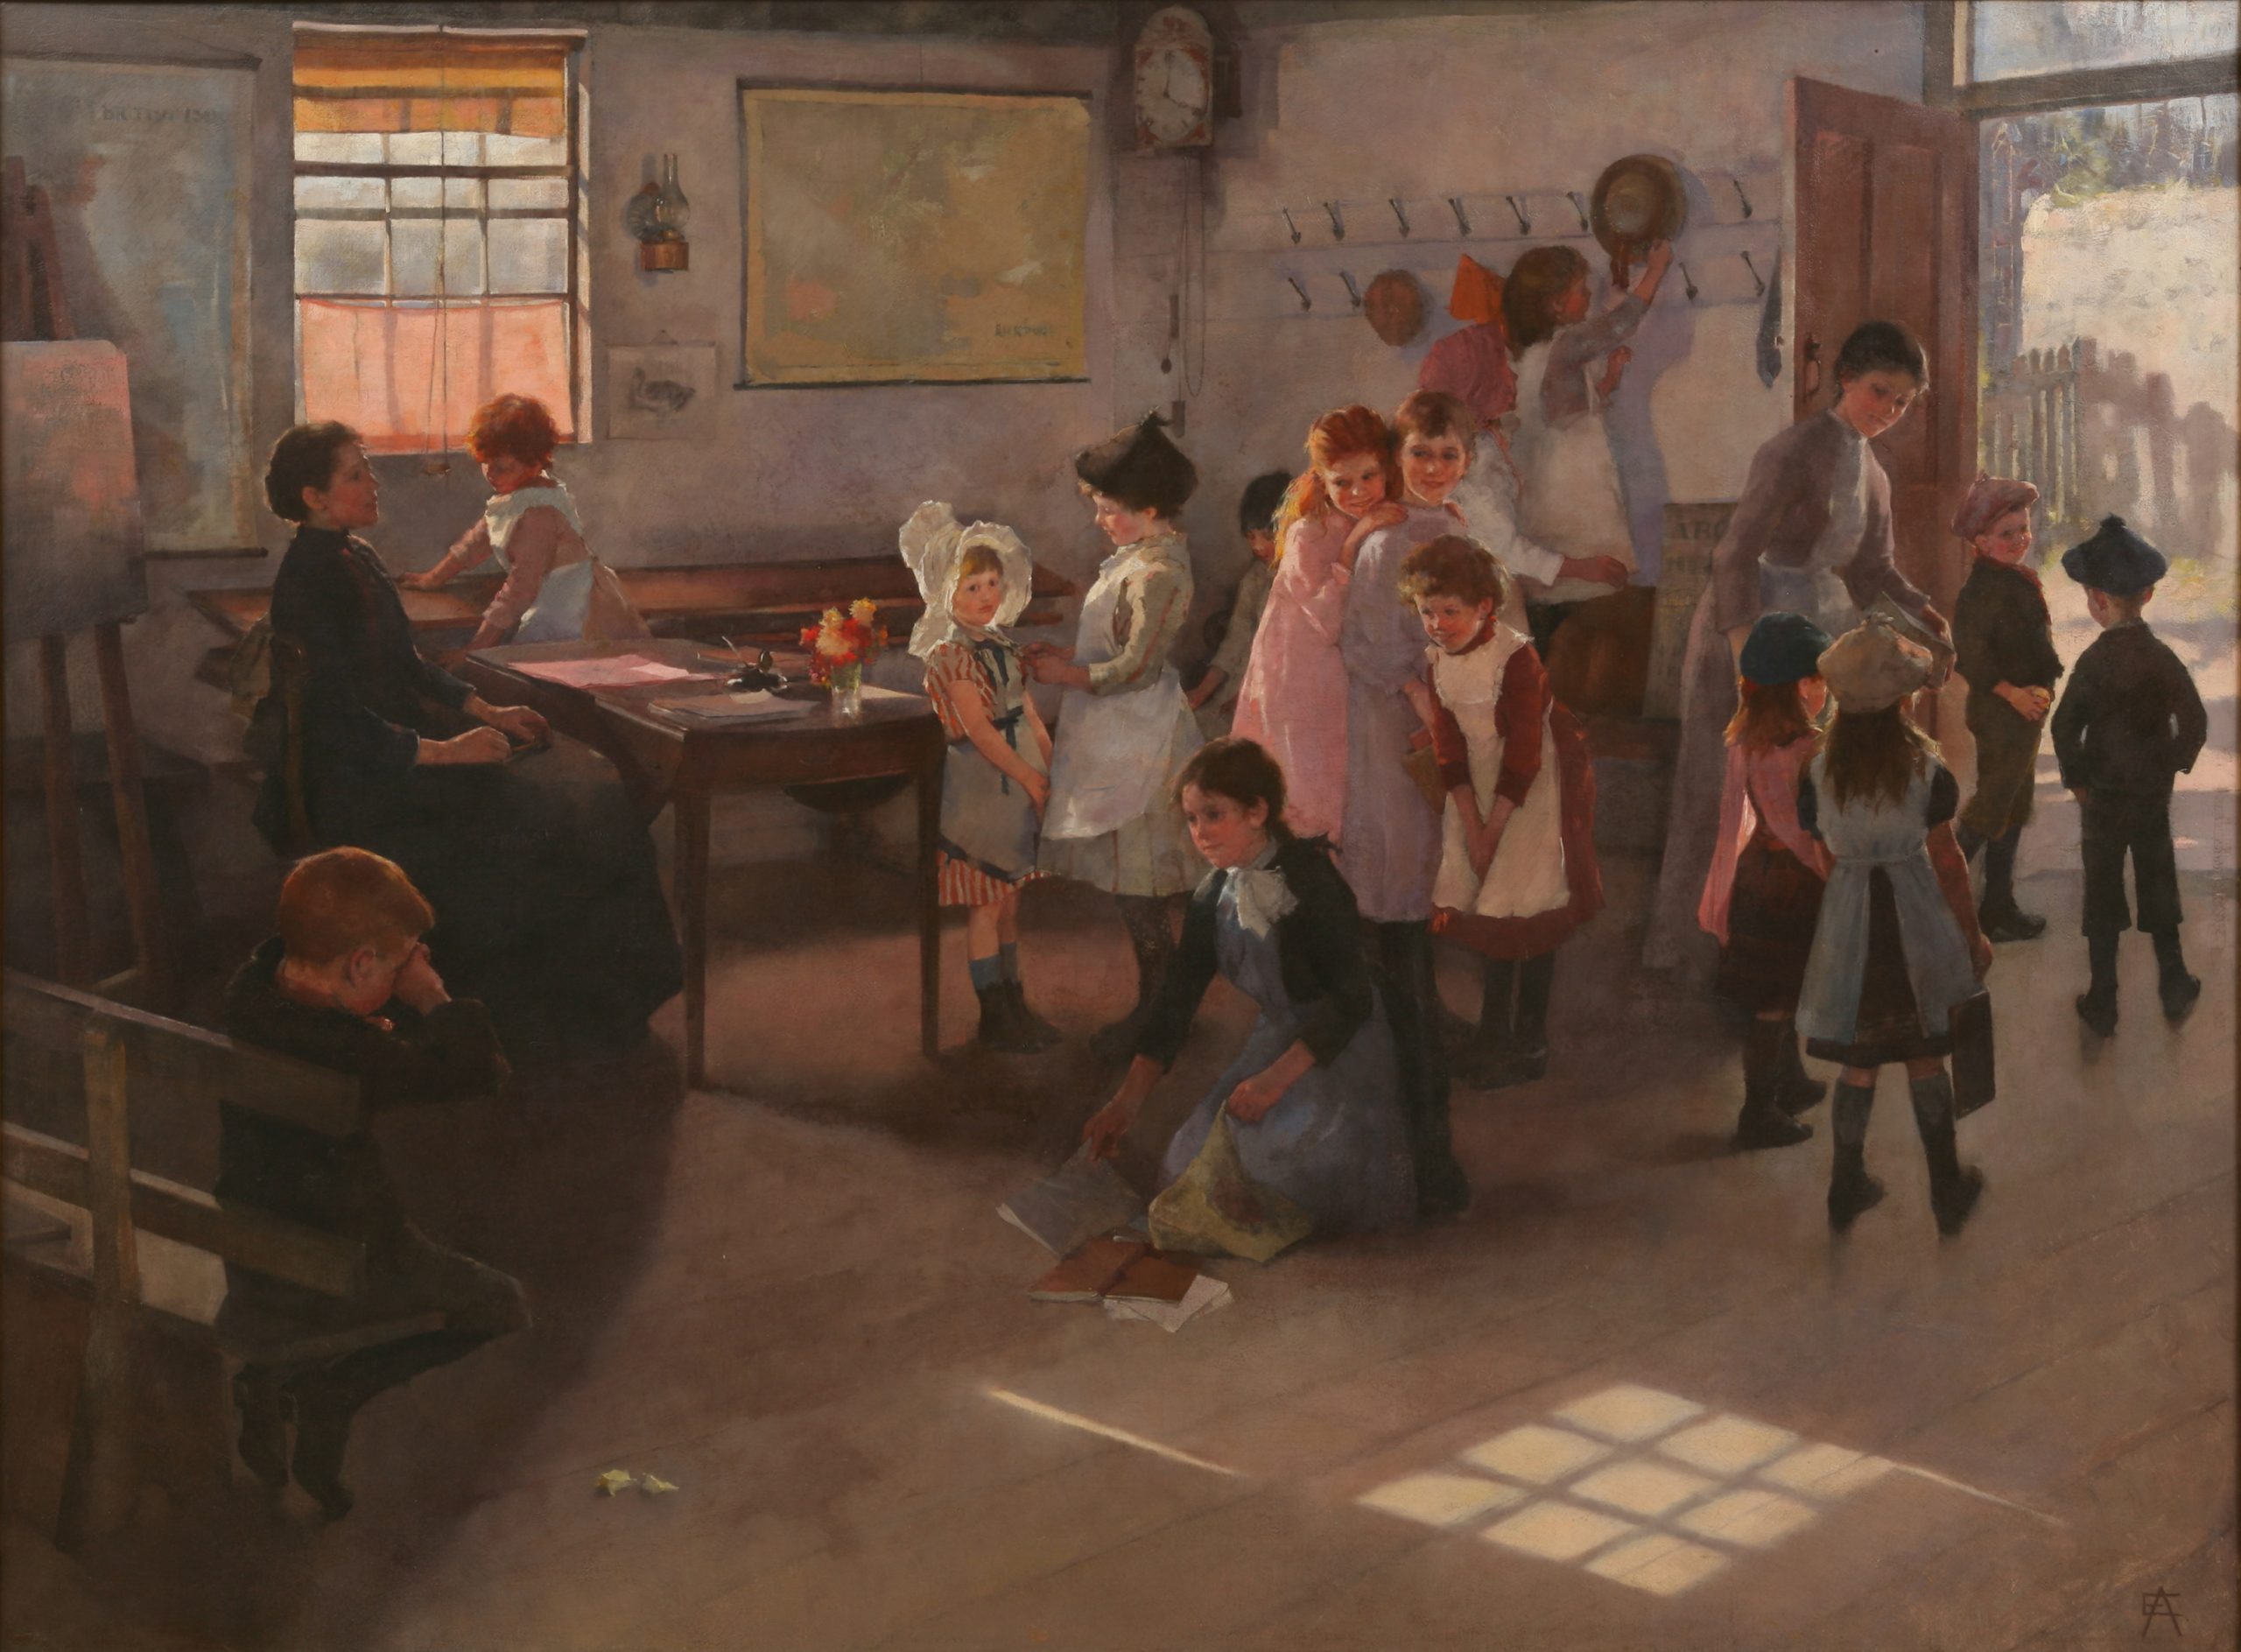 Oil on canvas painting of the interior of a rural schoolhouse in late nineteenth-century England. Children of various ages prepare to leave the classroom. A clock at the back of the room displays a time of just after 4:00 p.m. A woman standing by the door guides children outside, while a seated woman observes the class from behind a desk. Light enters through a single window and creates a grid-like patch of sunlight on the wooden floor.